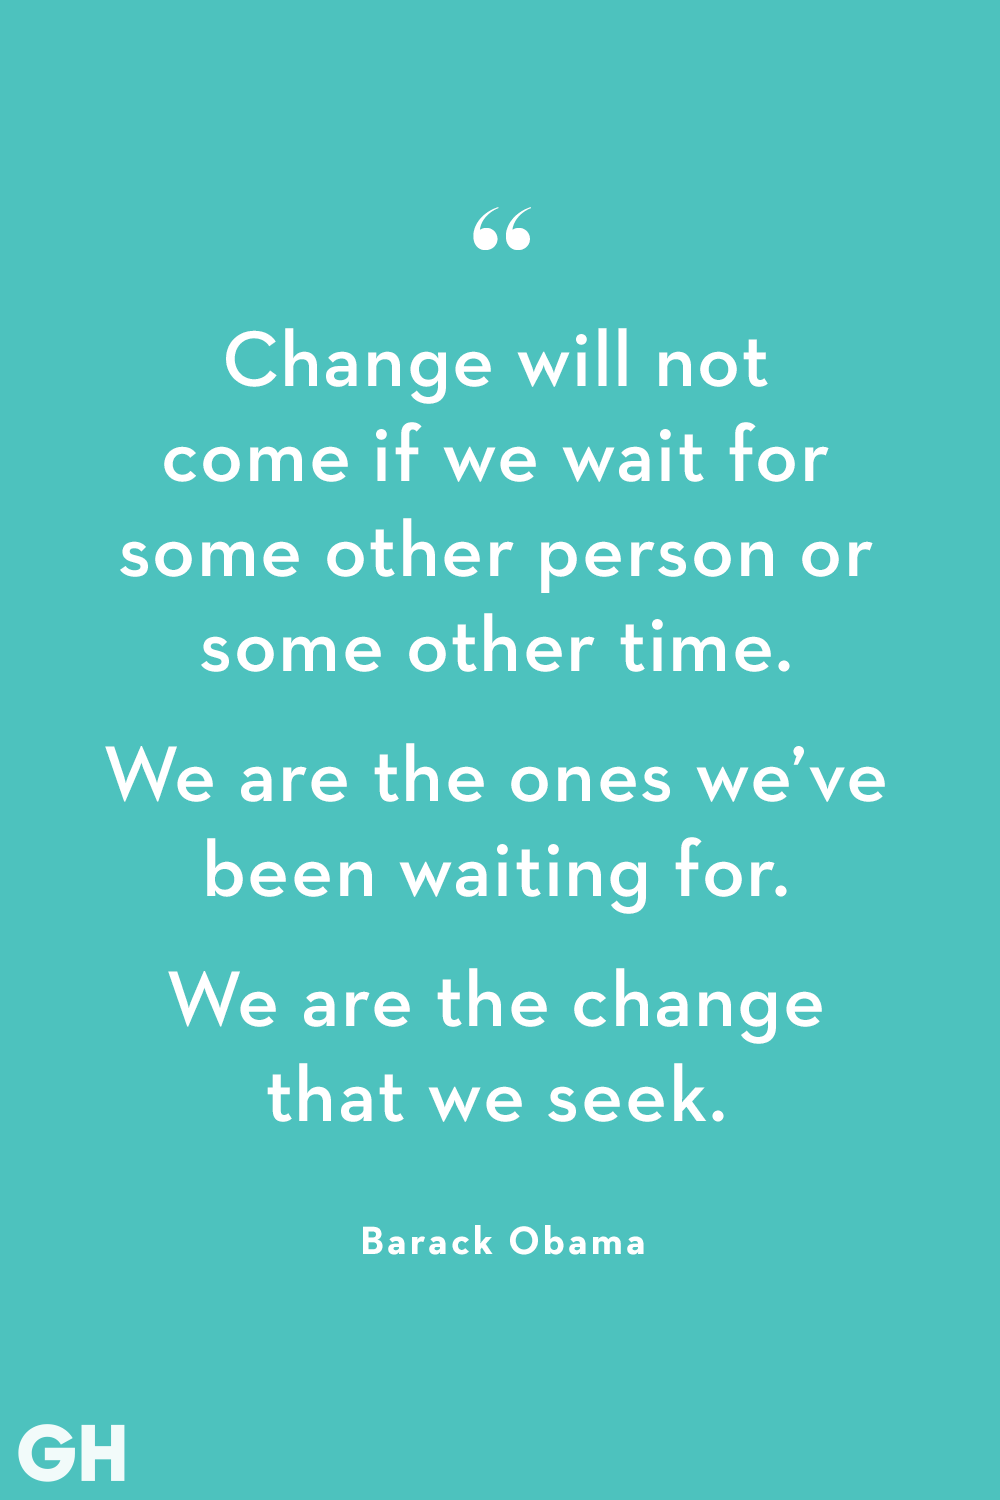 quotes-about-change-barack-obama-1548343270.png